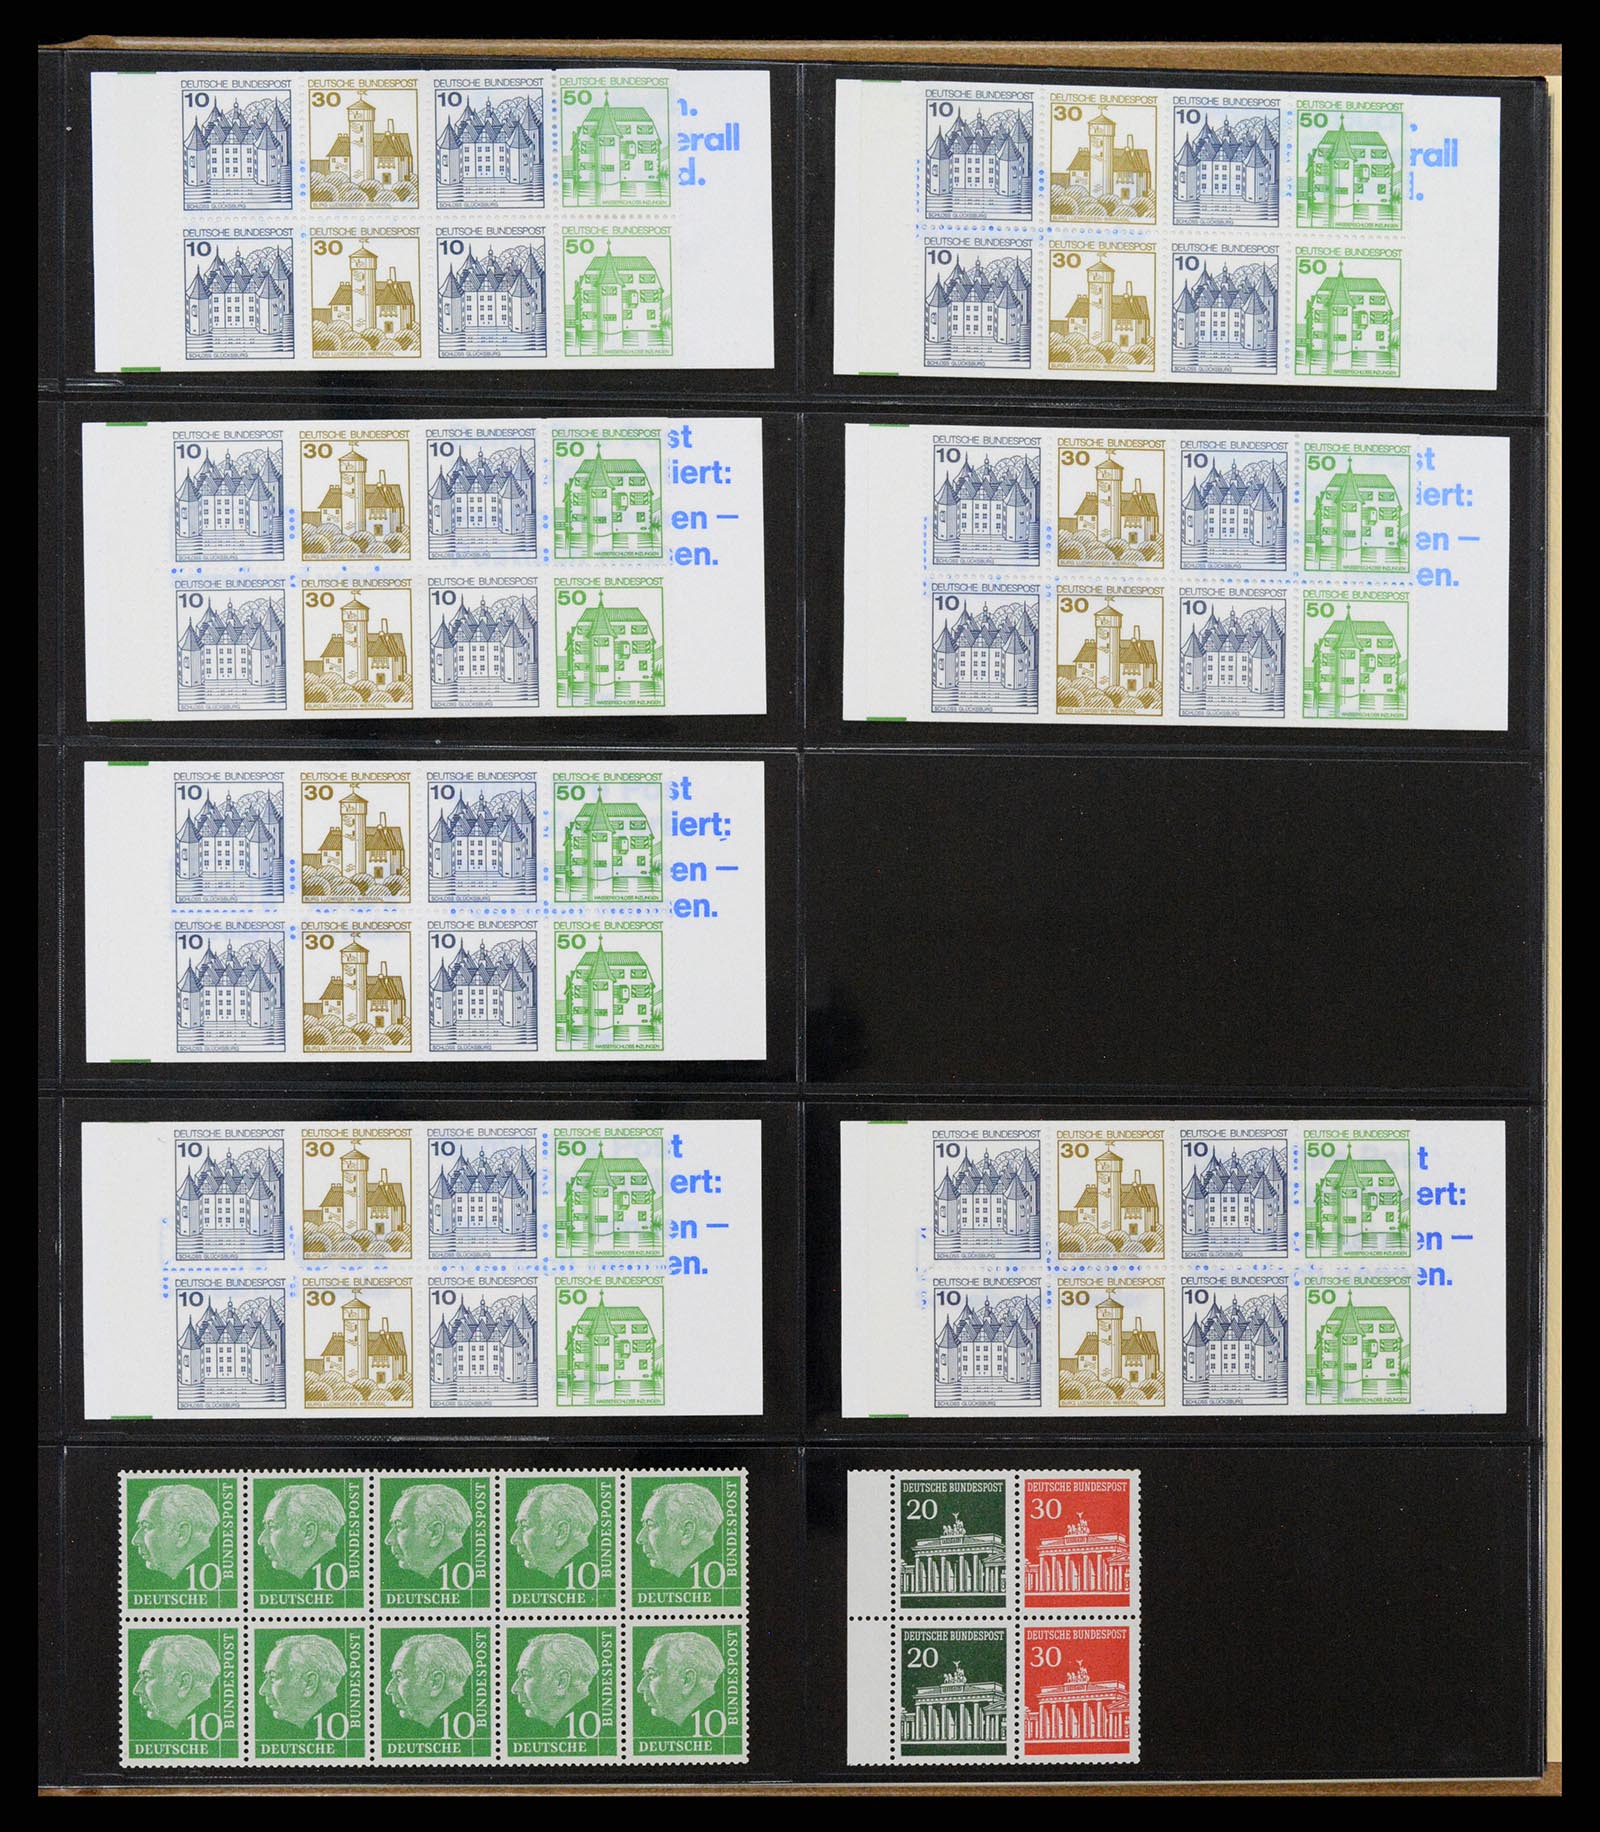 37365 041 - Stamp collection 37365 Bundespost stamp booklets 1951-2001.